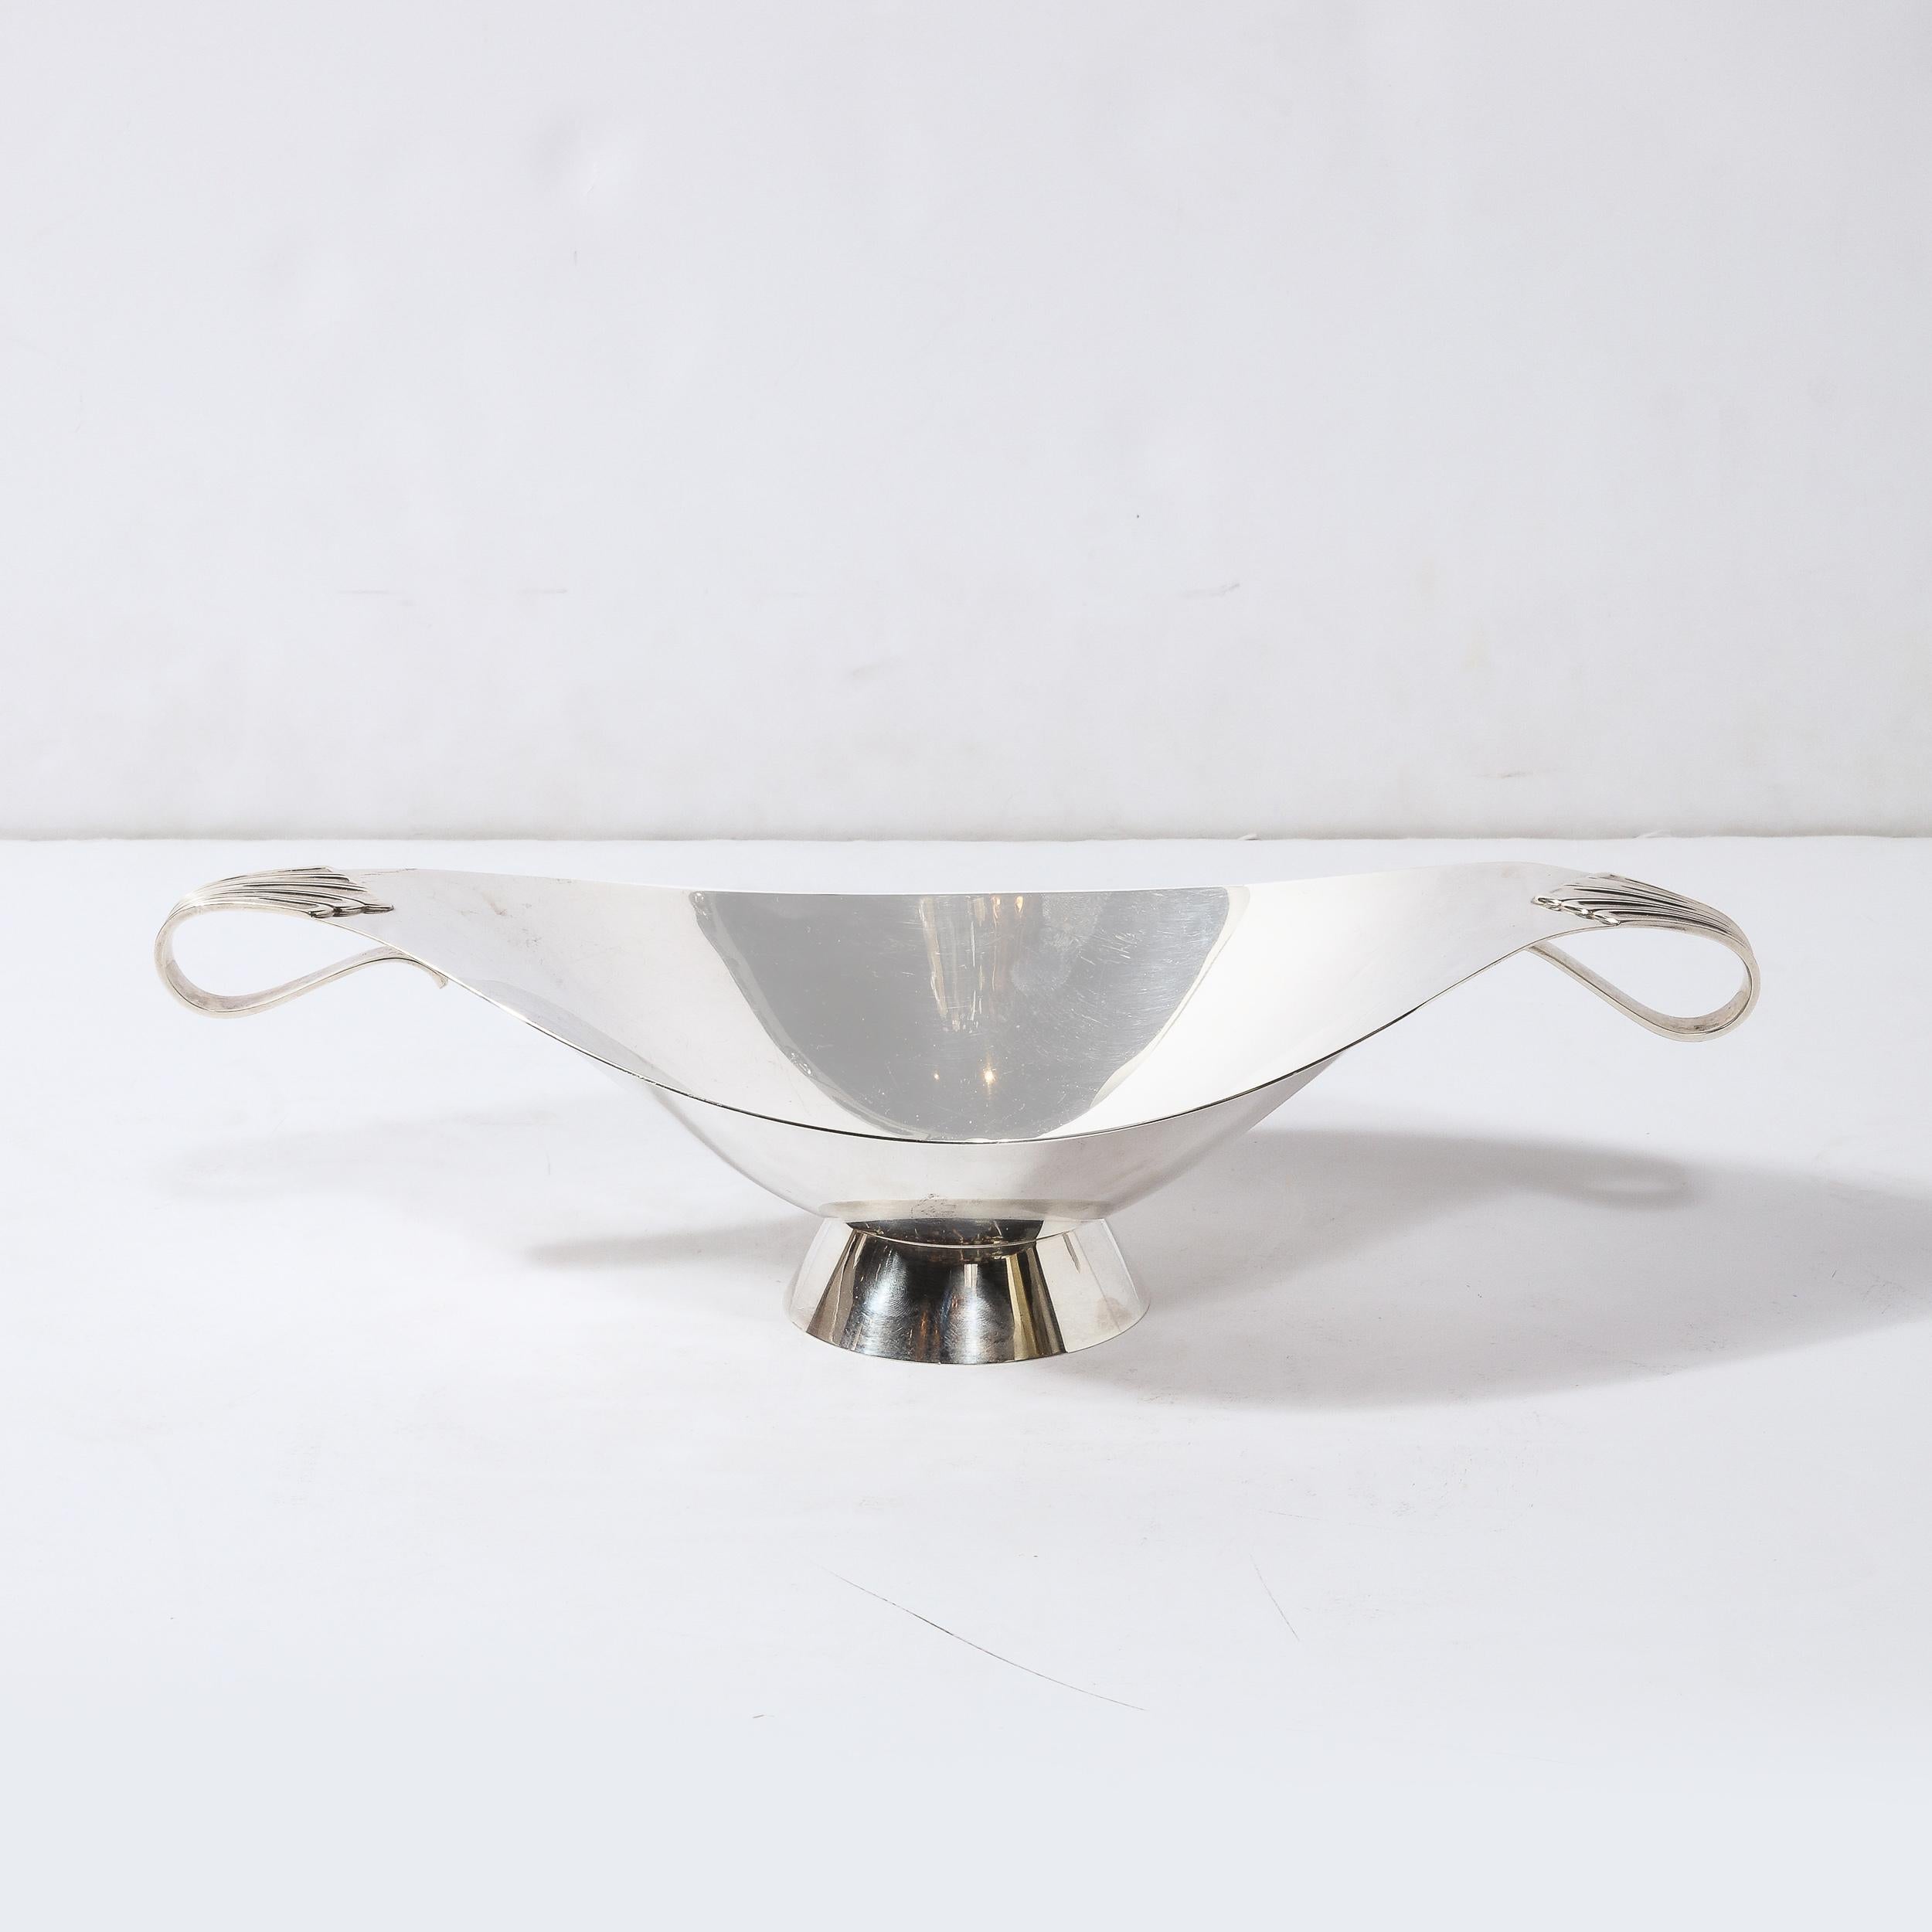 This rare Mid-Century Modern sterling silver centerpiece bowl was realized Tiffany & Co- America's premiere maker of luxury silver goods and luxury products since 1838. This piece was realized in the United States circa 1950, and is a first rate